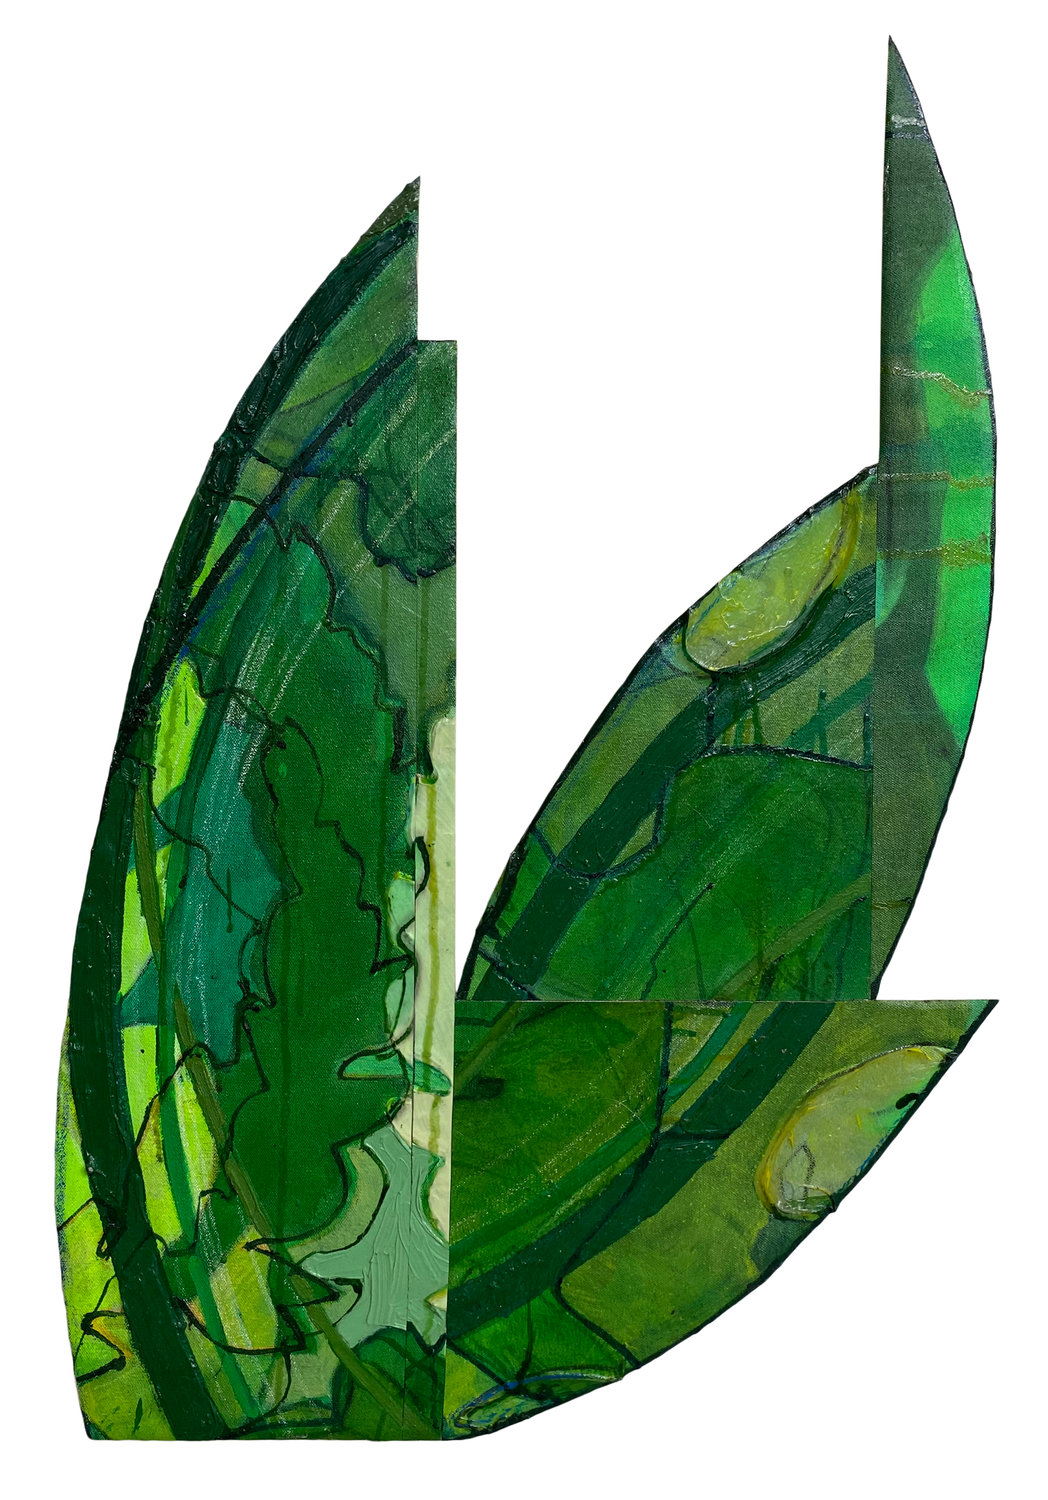 Ana Wolovick, Re-Construction (Green Painting), 2007–2022, 27 x 18.25 inches, acrylic, oil enamel and spray paint with moldable glue on canvas backed with balsa wood. Courtesy of the artist.